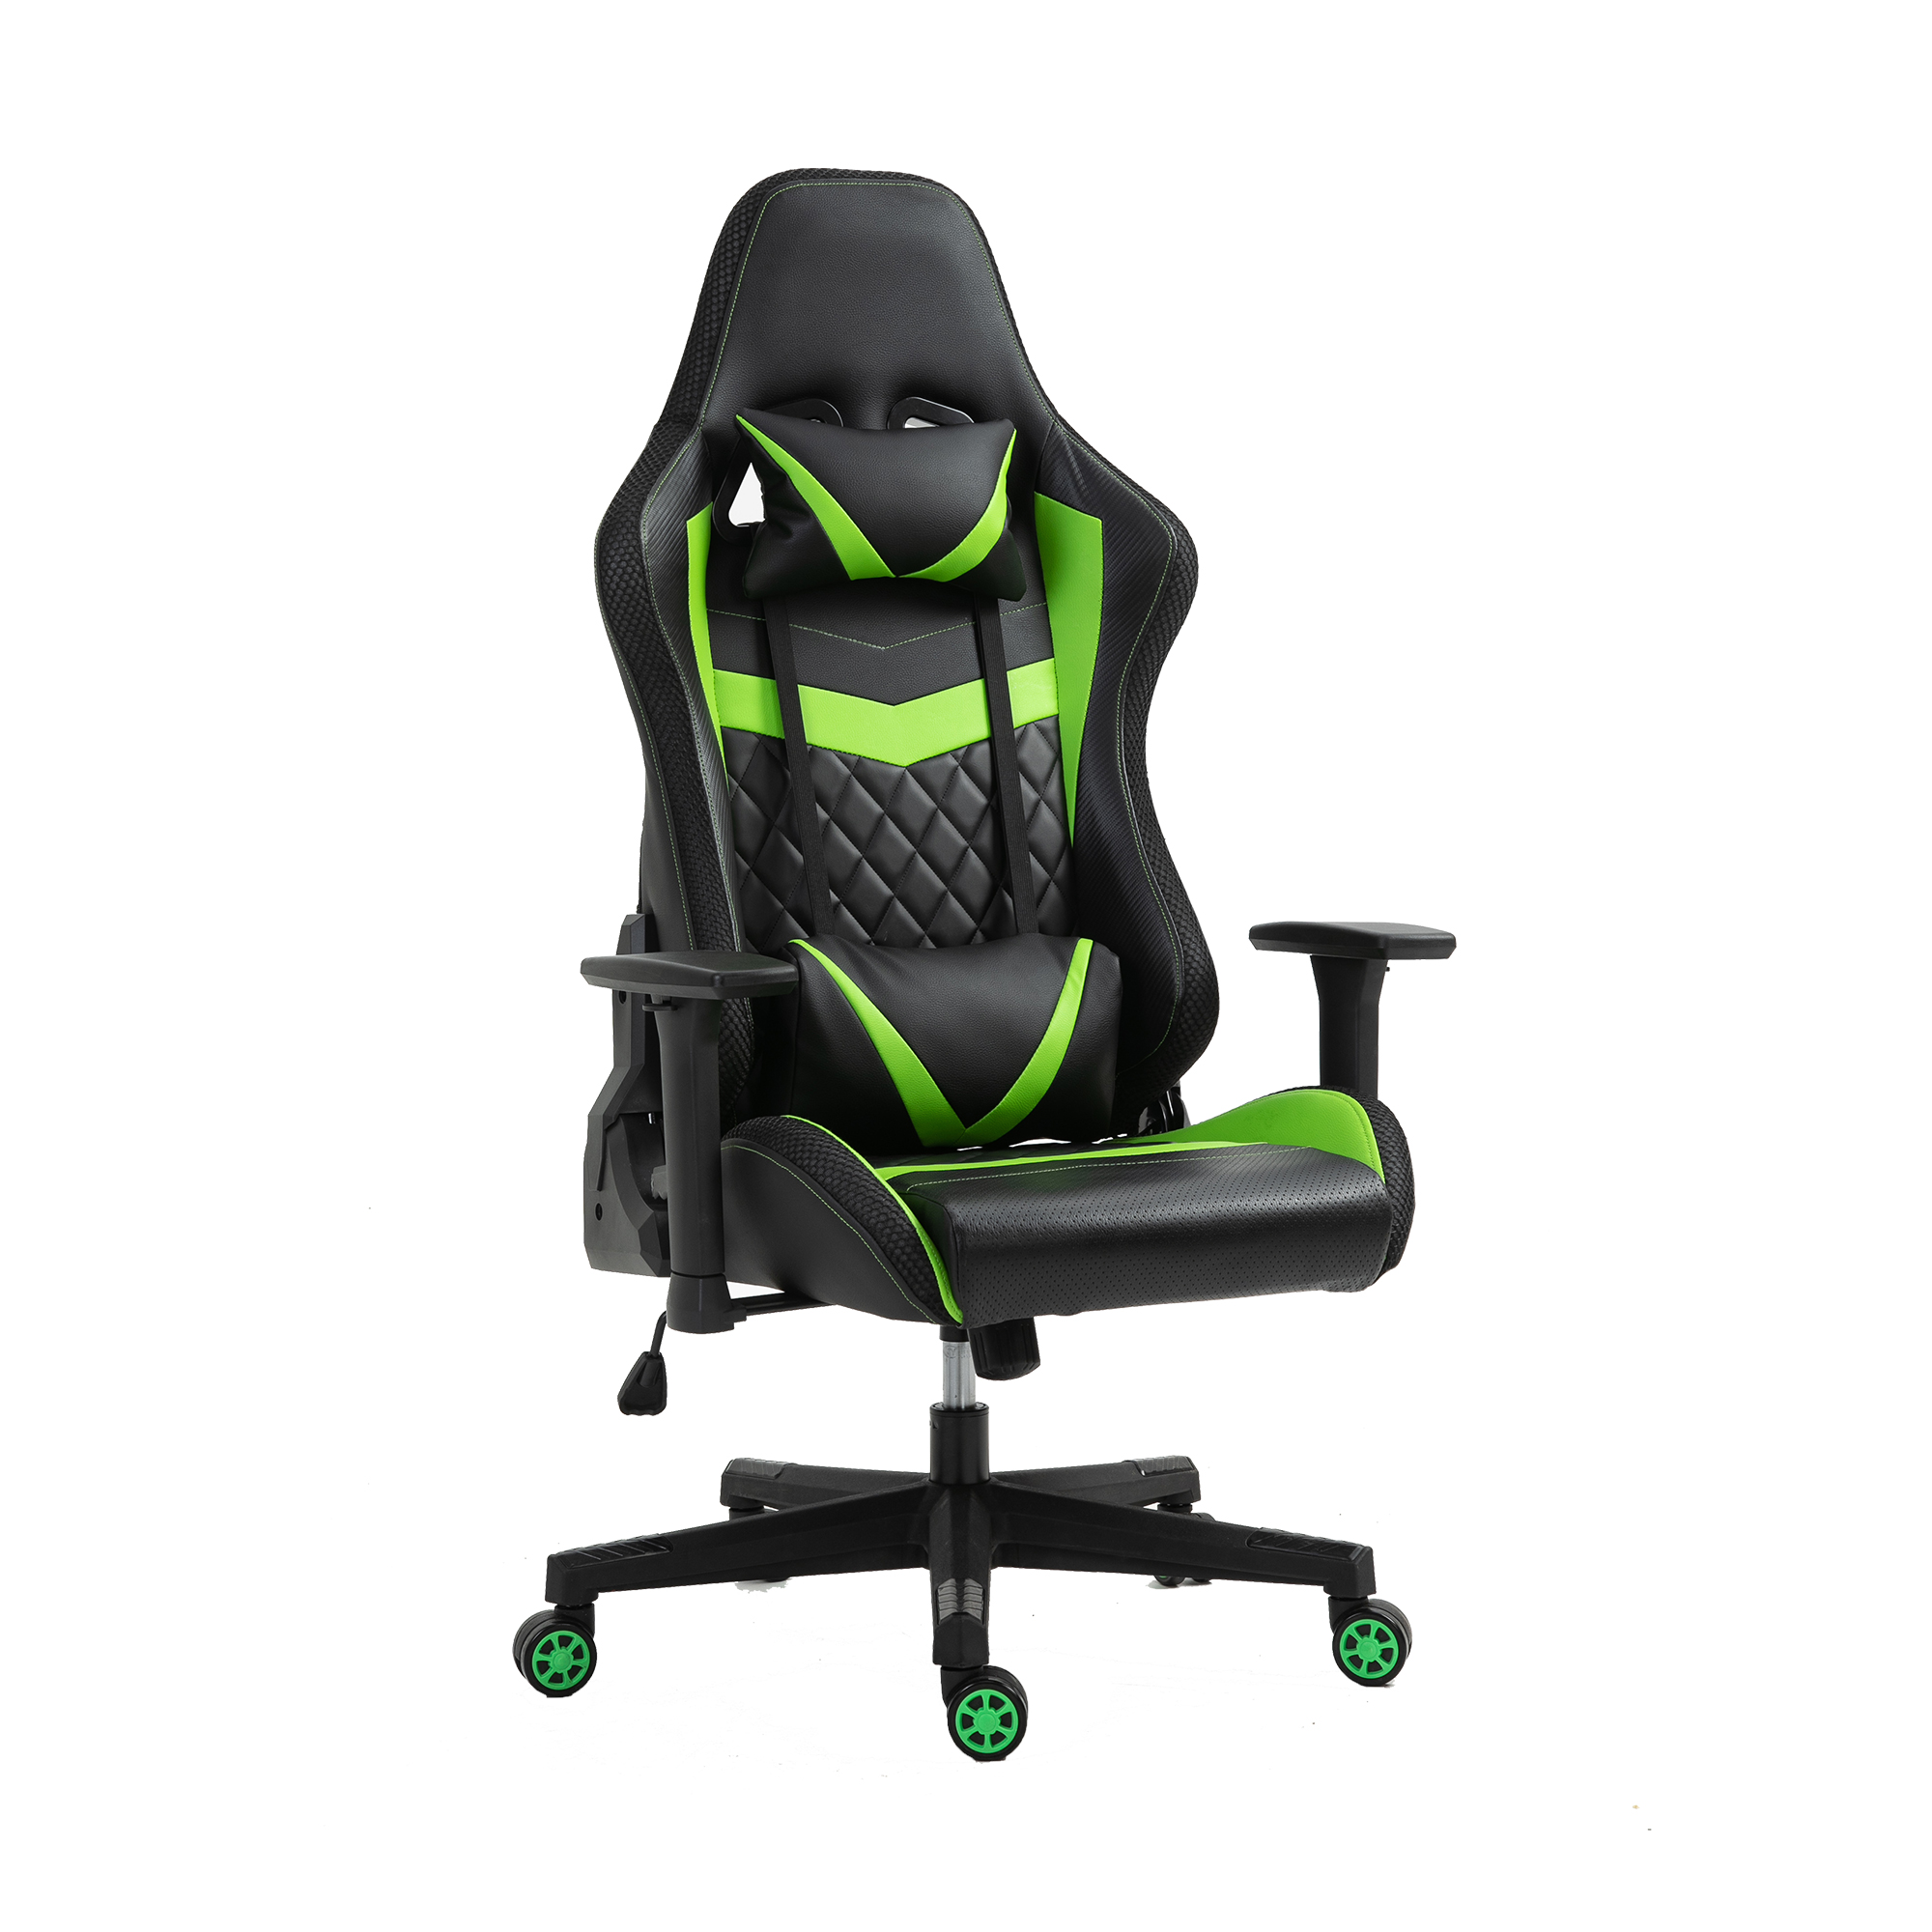 China wholesale White Gaming Chair Exporters –  Free Sample Hot Selling Cheap Leather Racing Chair For Gamer Home Office Chairs PC Gaming Setups – ANJI JIFANG